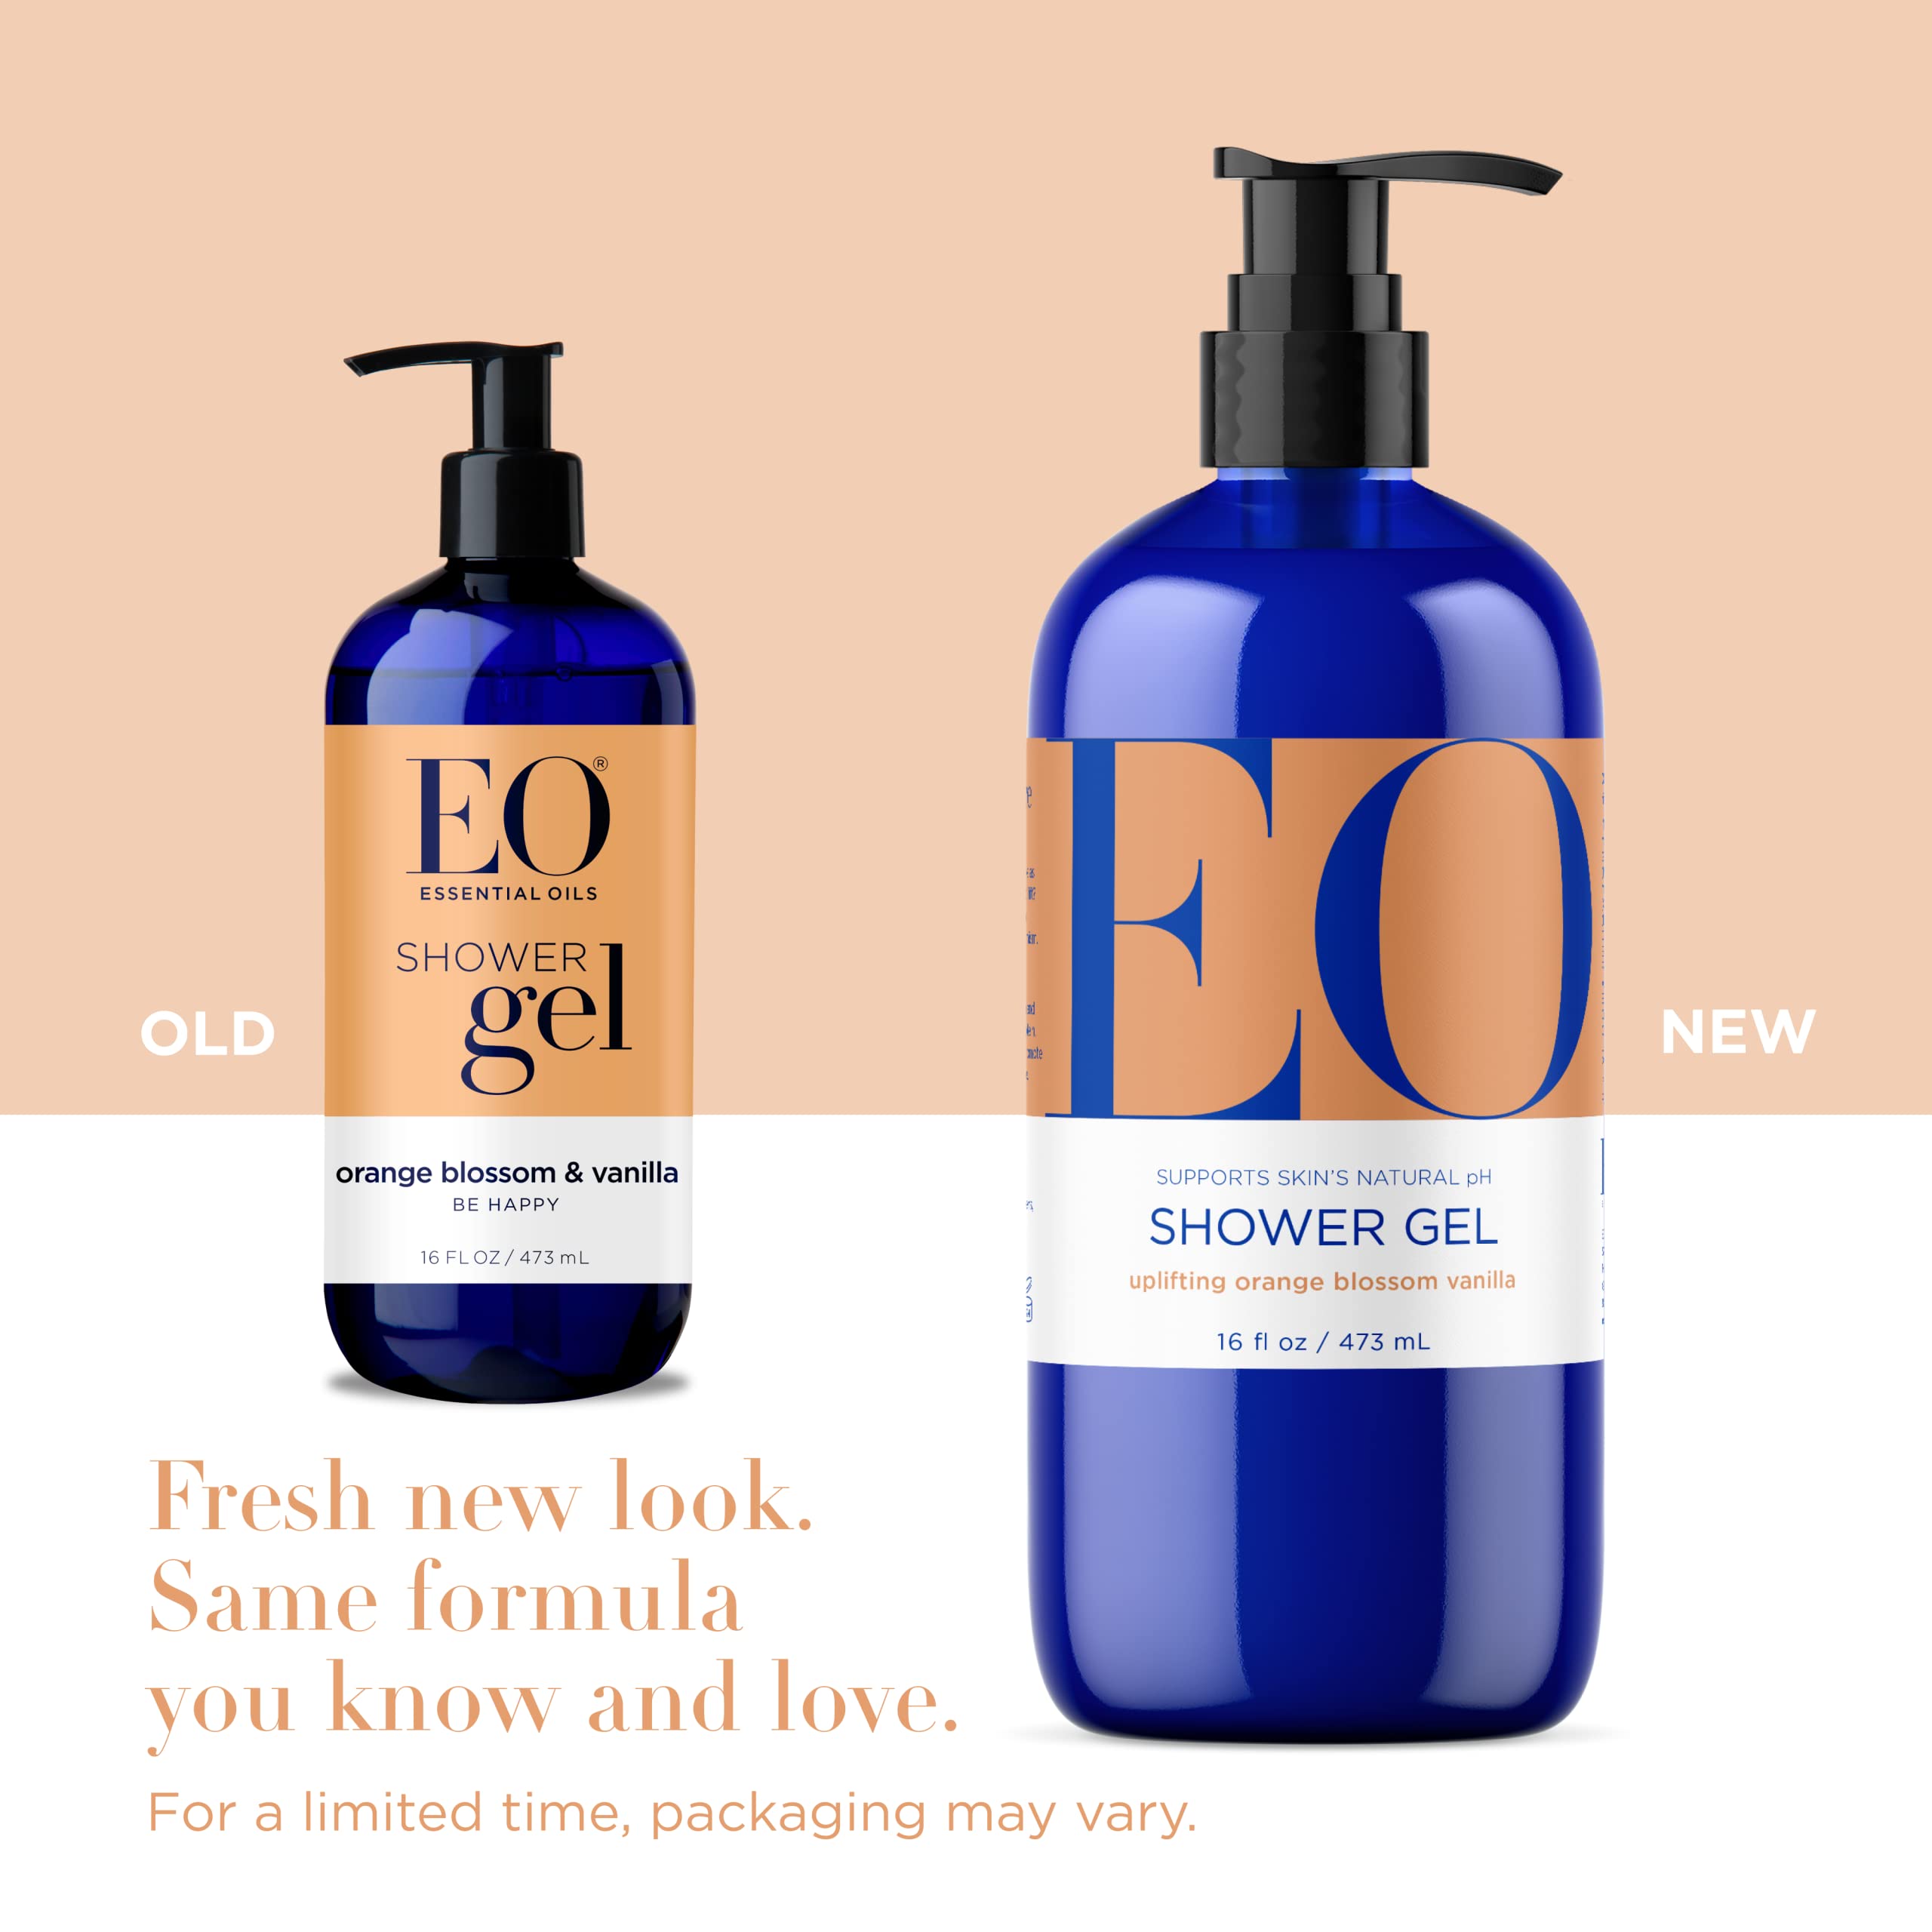 EO Shower Gel Body Wash, 16 Ounce (Pack of 2), Orange Blossom and Vanilla, Organic Plant-Based Skin Conditioning Cleanser with Pure Essentials Oils